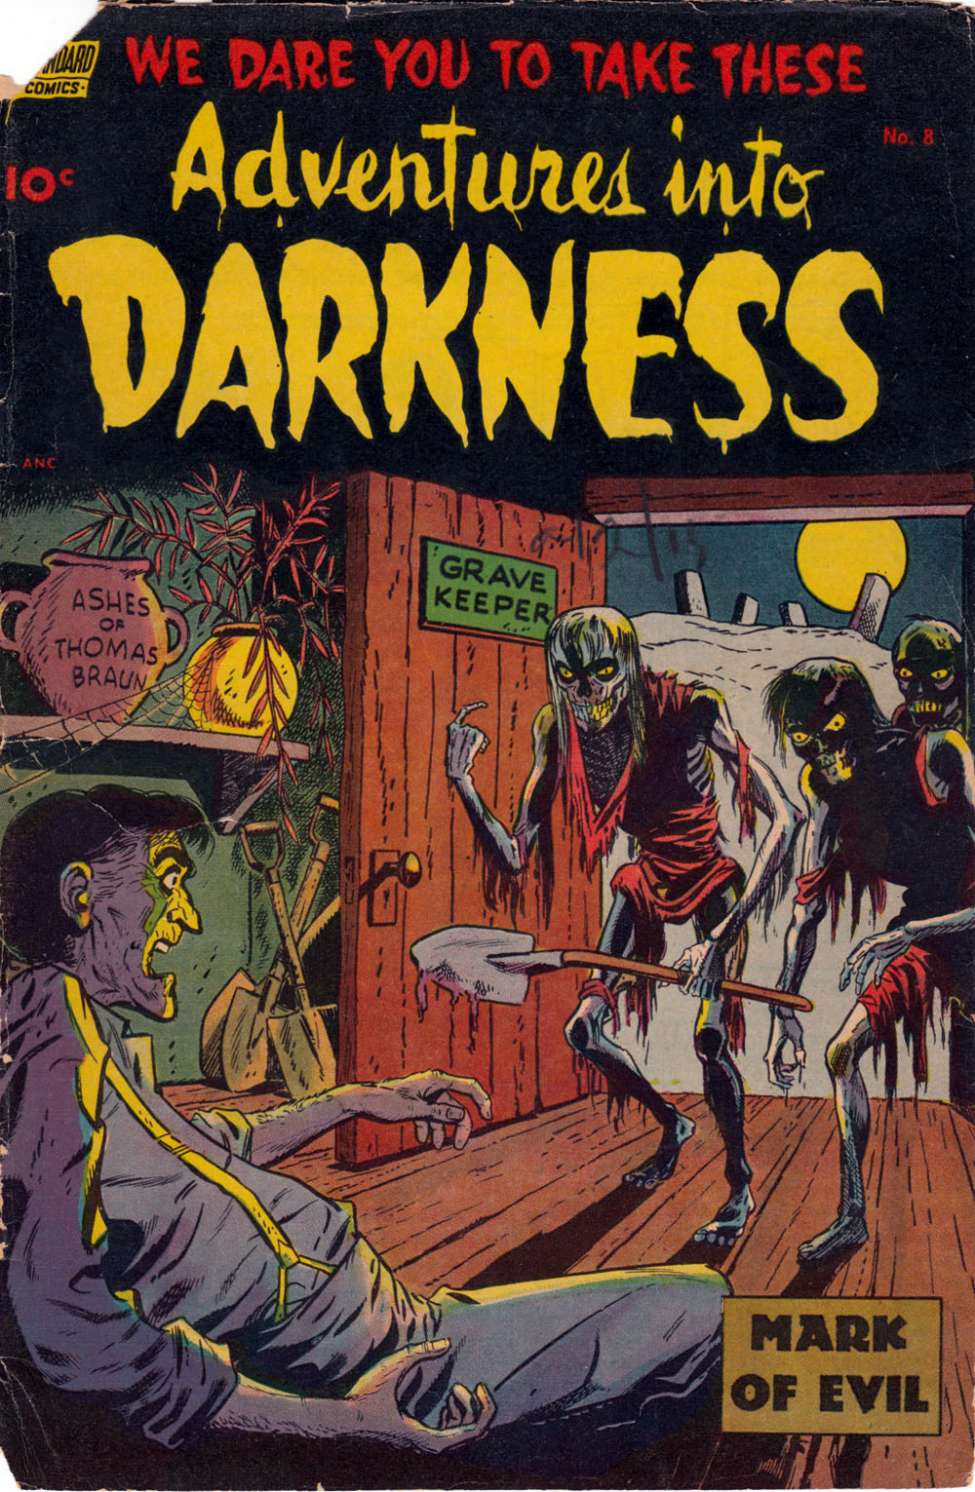 Comic Book Cover For Adventures into Darkness 8